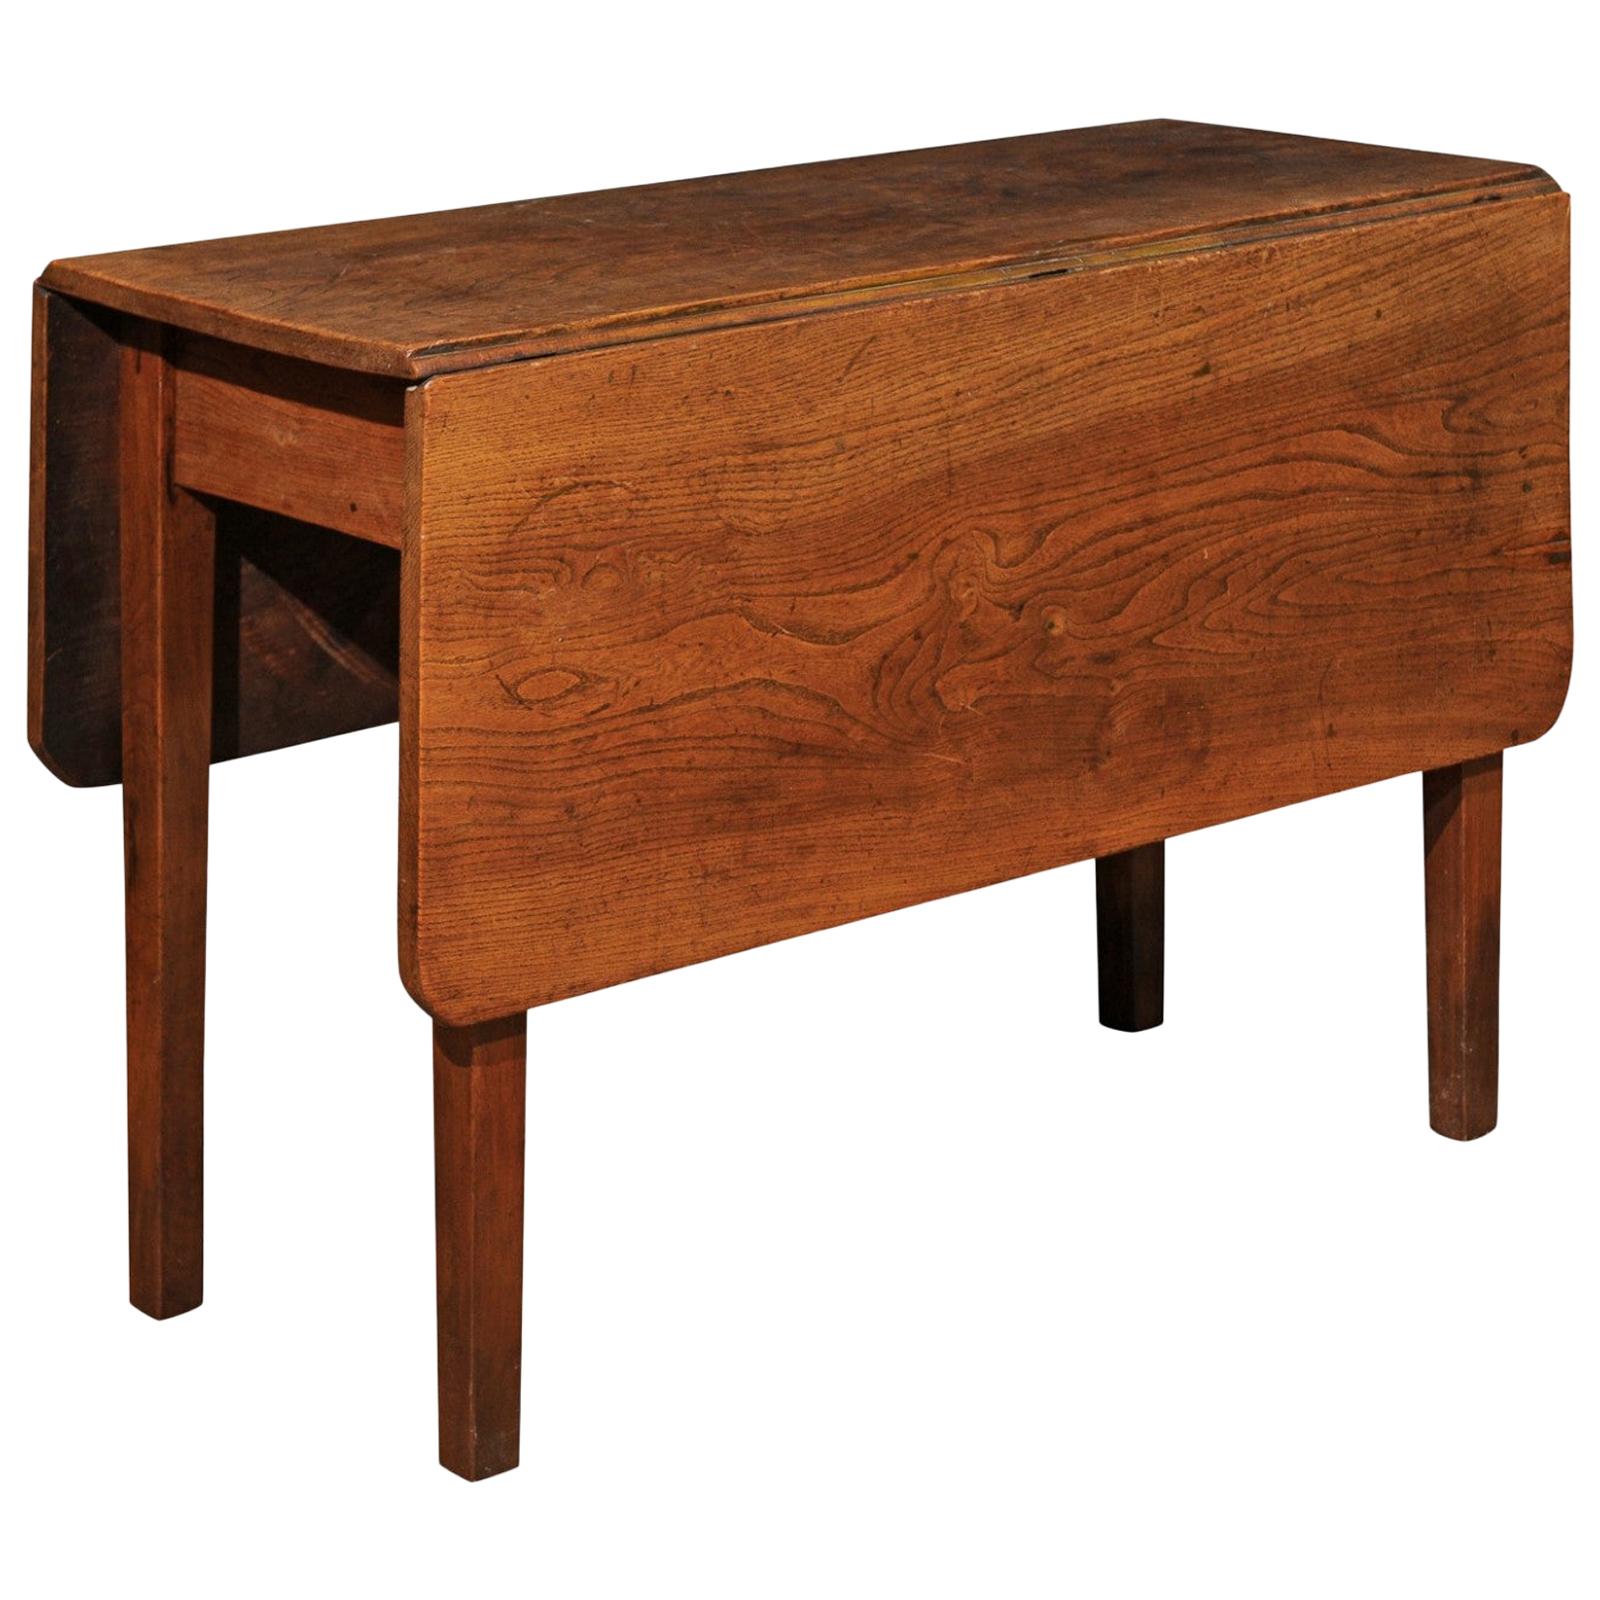 An English oak drop-leaf table from the 19th century, with gateleg base. Created in England during the 19th century, this oak table features a rectangular top with rounded corners made of two drop leaves resting upon a gateleg base once open. The